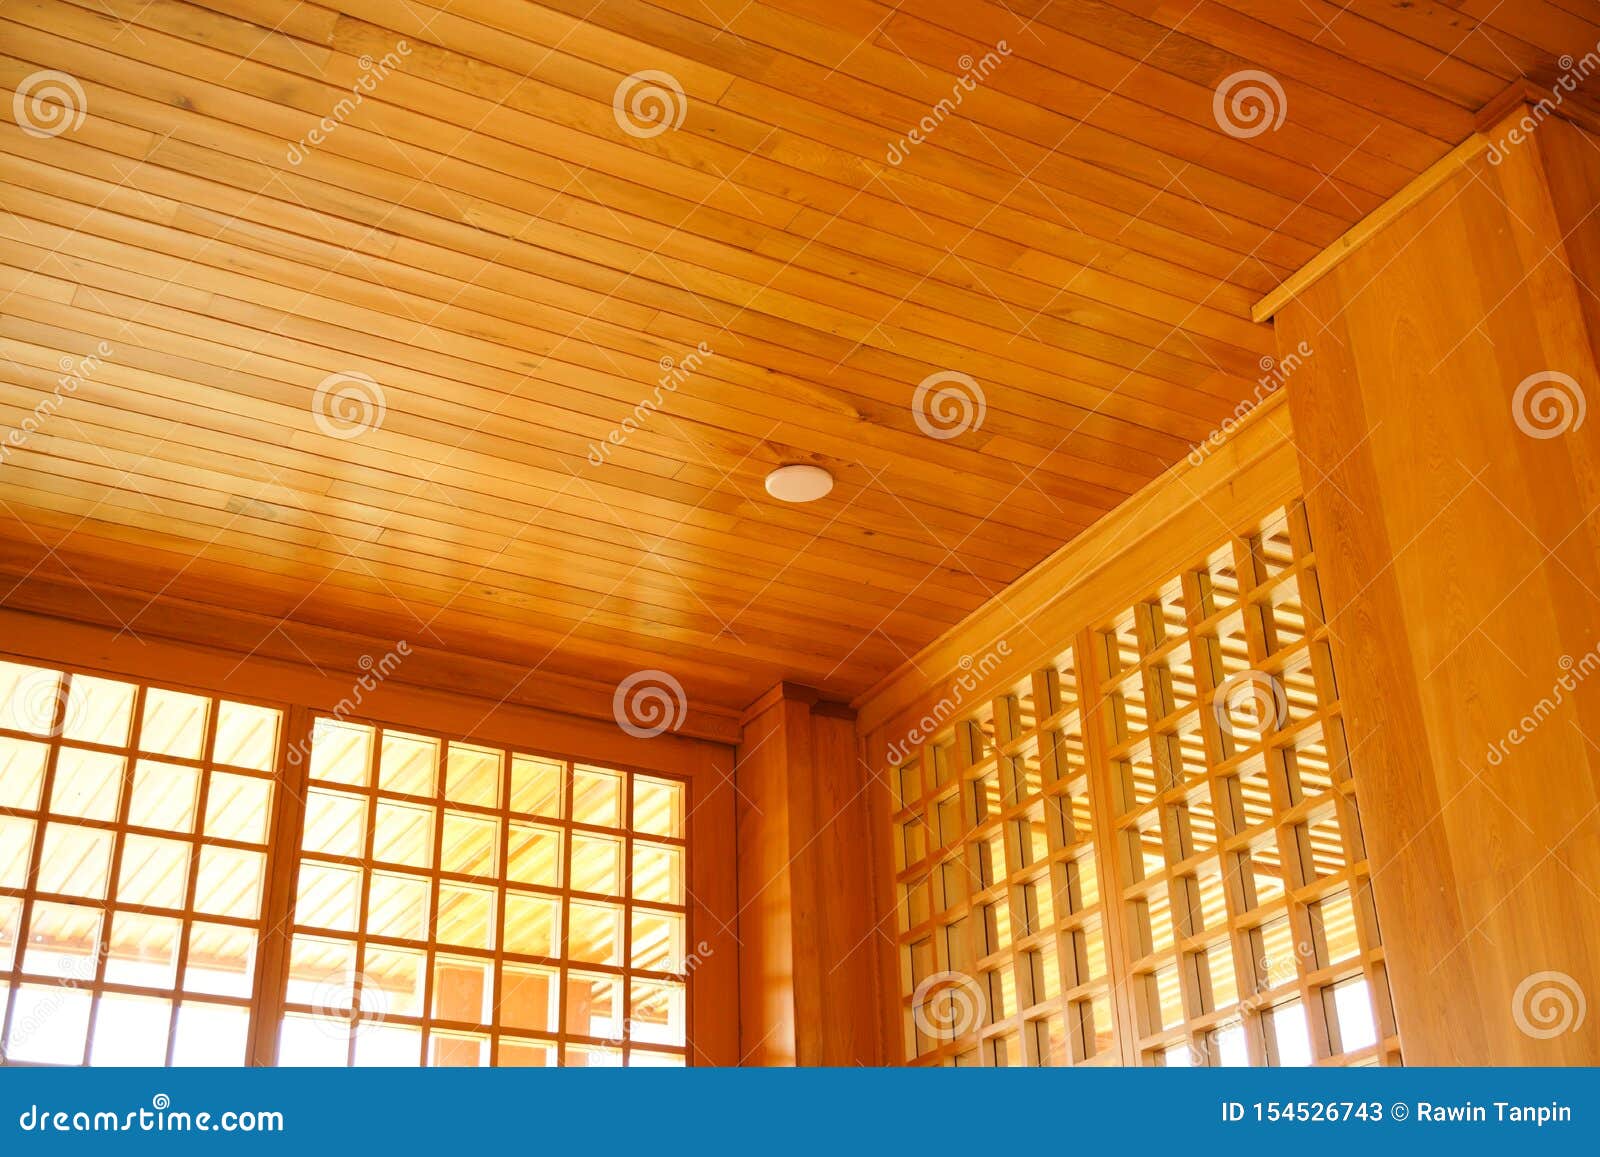 Traditional Wood Of Japan Style Texture Of Japanese Wooden Ceiling